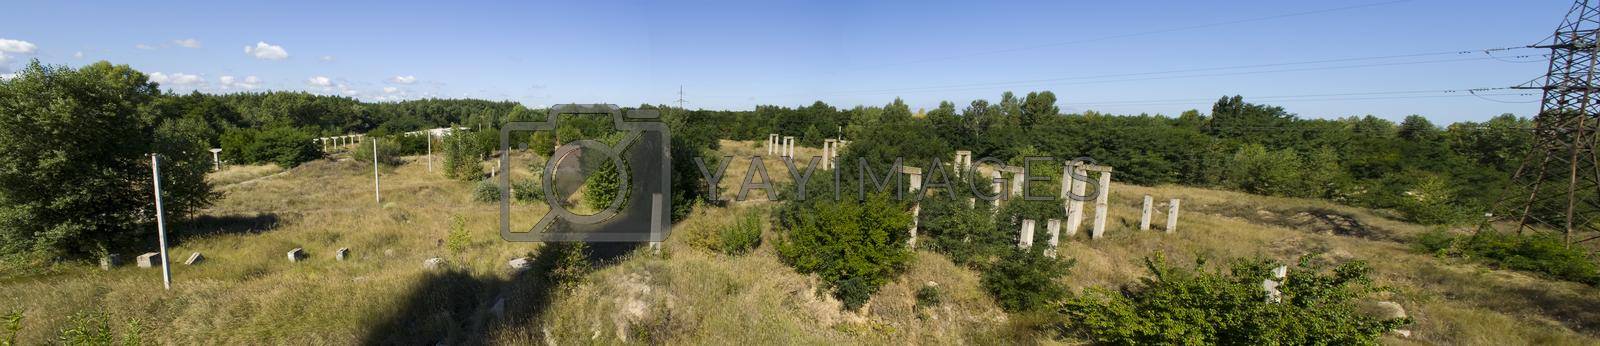 Royalty free image of panorama of piles of destroyed buildings overgrown with grass and trees. by DePo